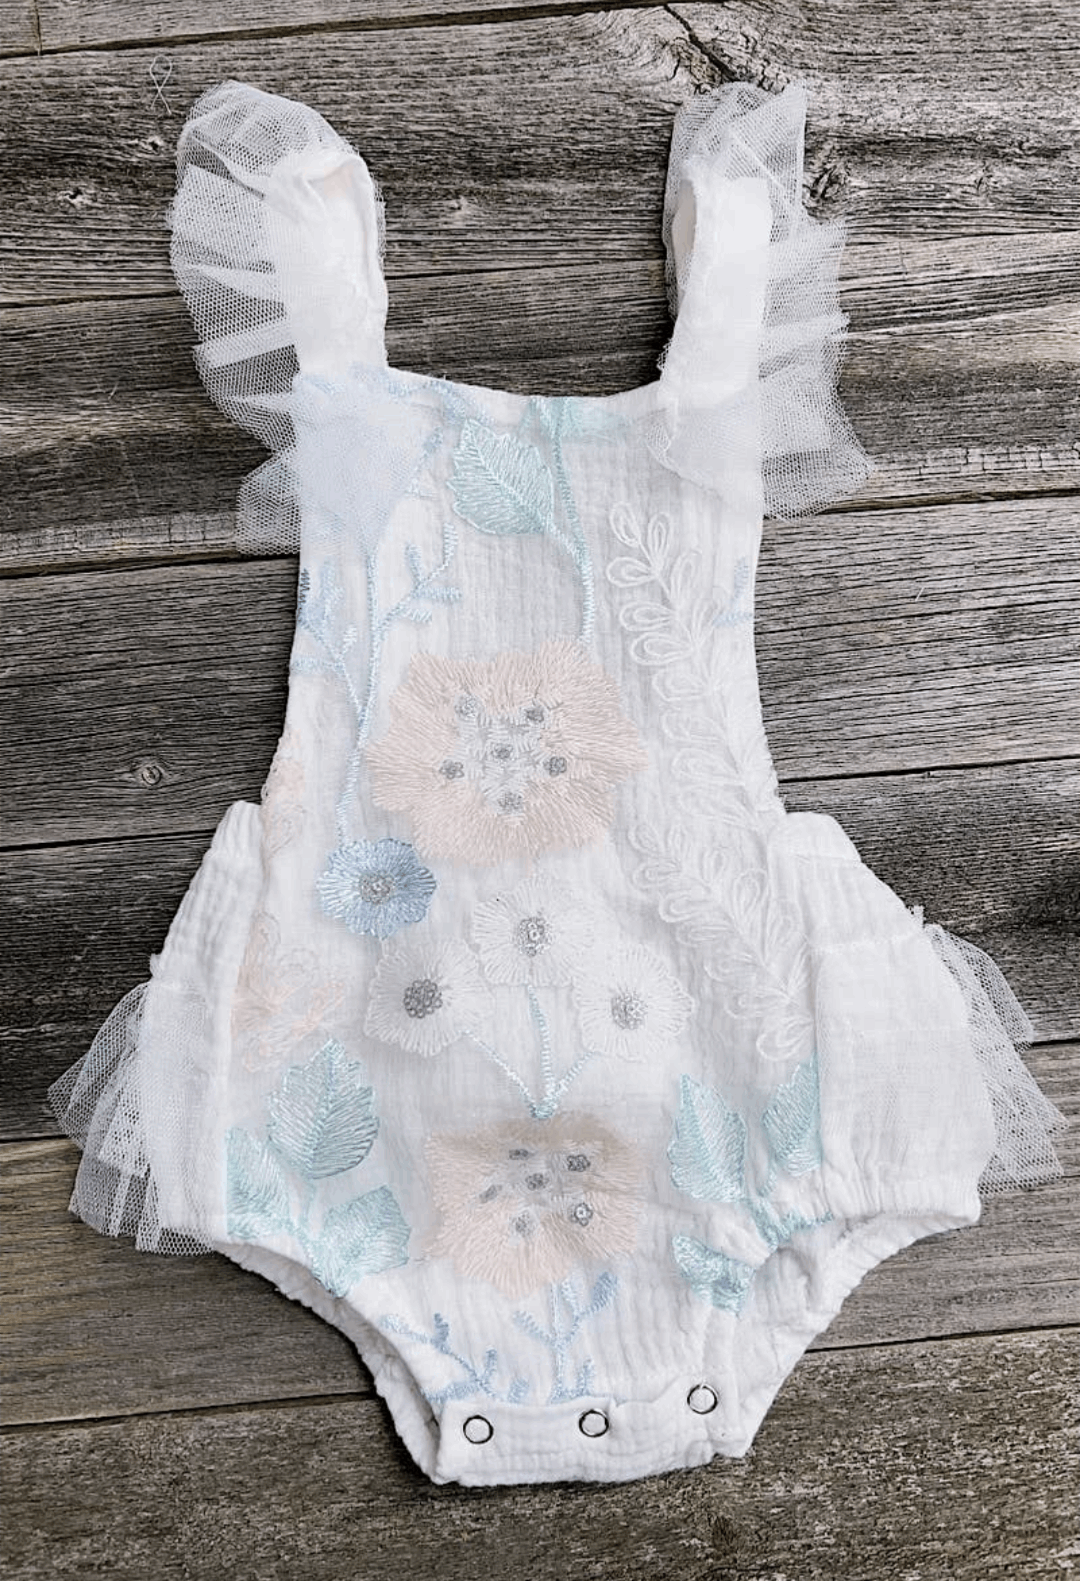 Lace Embroidered Baby Onesie